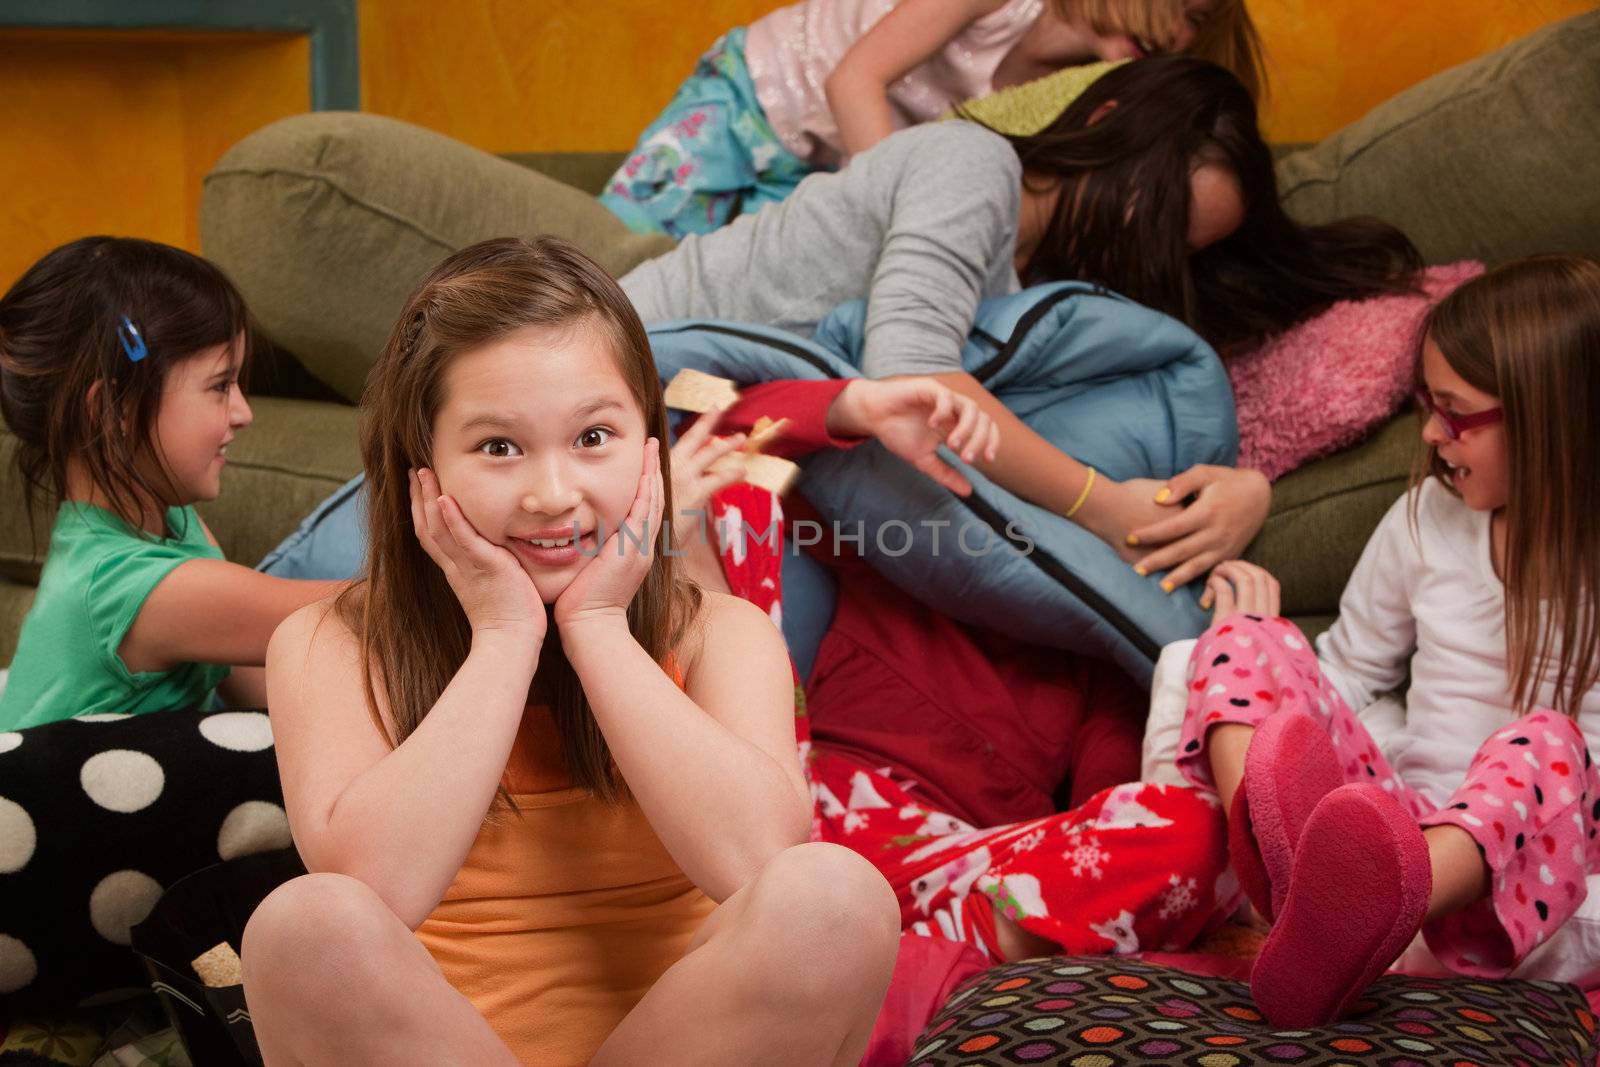 Girl overwhelmed with silly friends at a sleepover